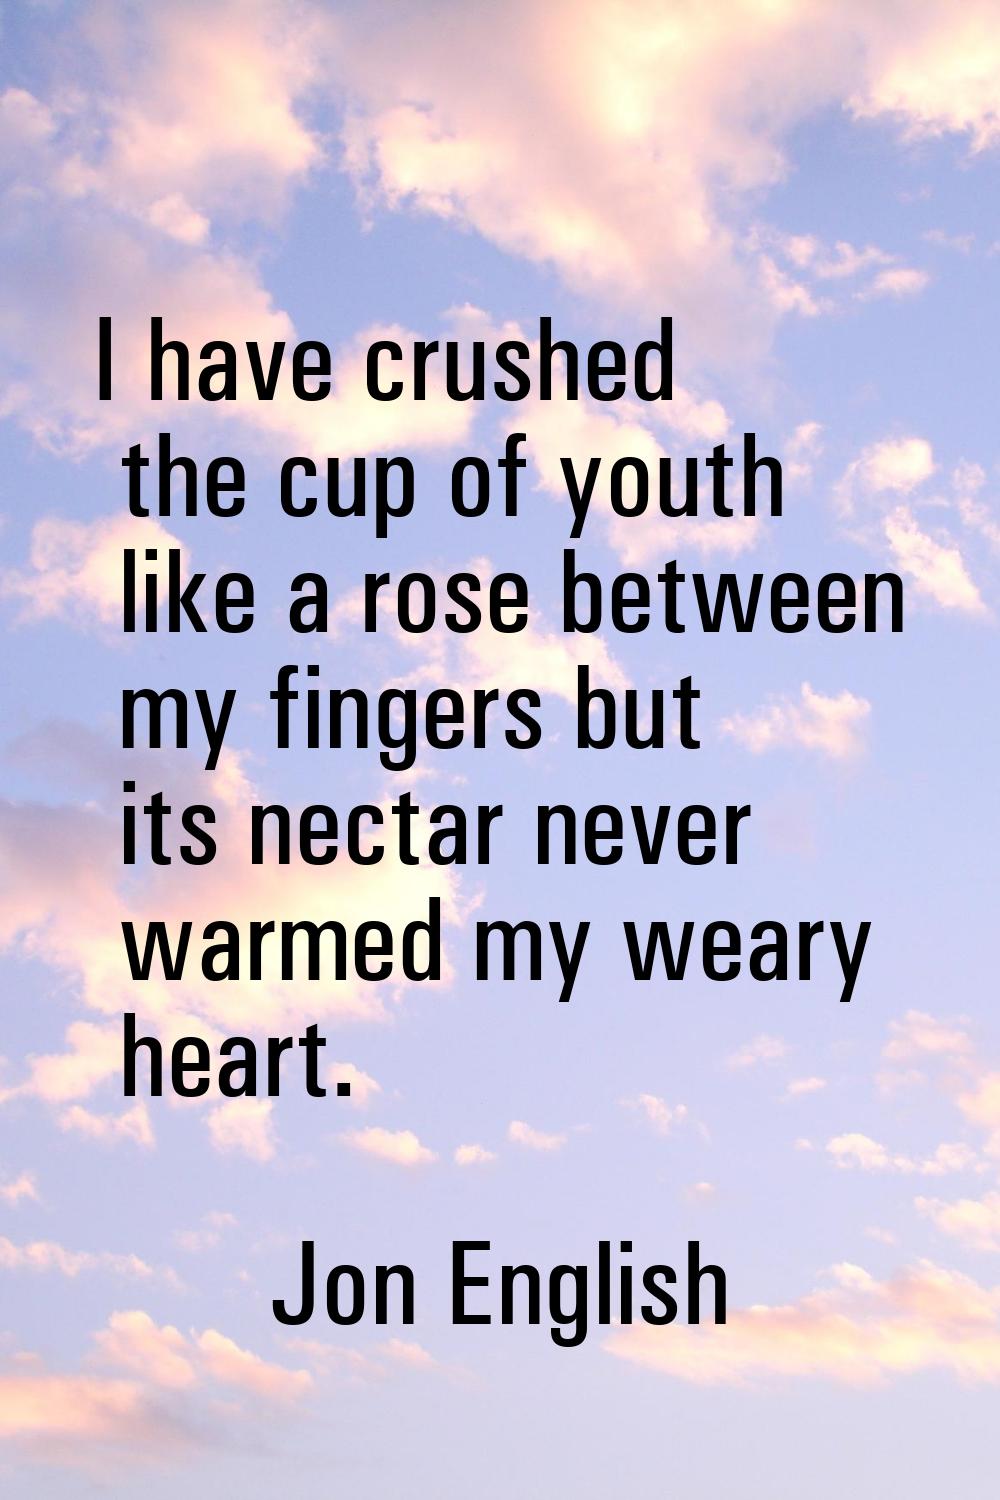 I have crushed the cup of youth like a rose between my fingers but its nectar never warmed my weary